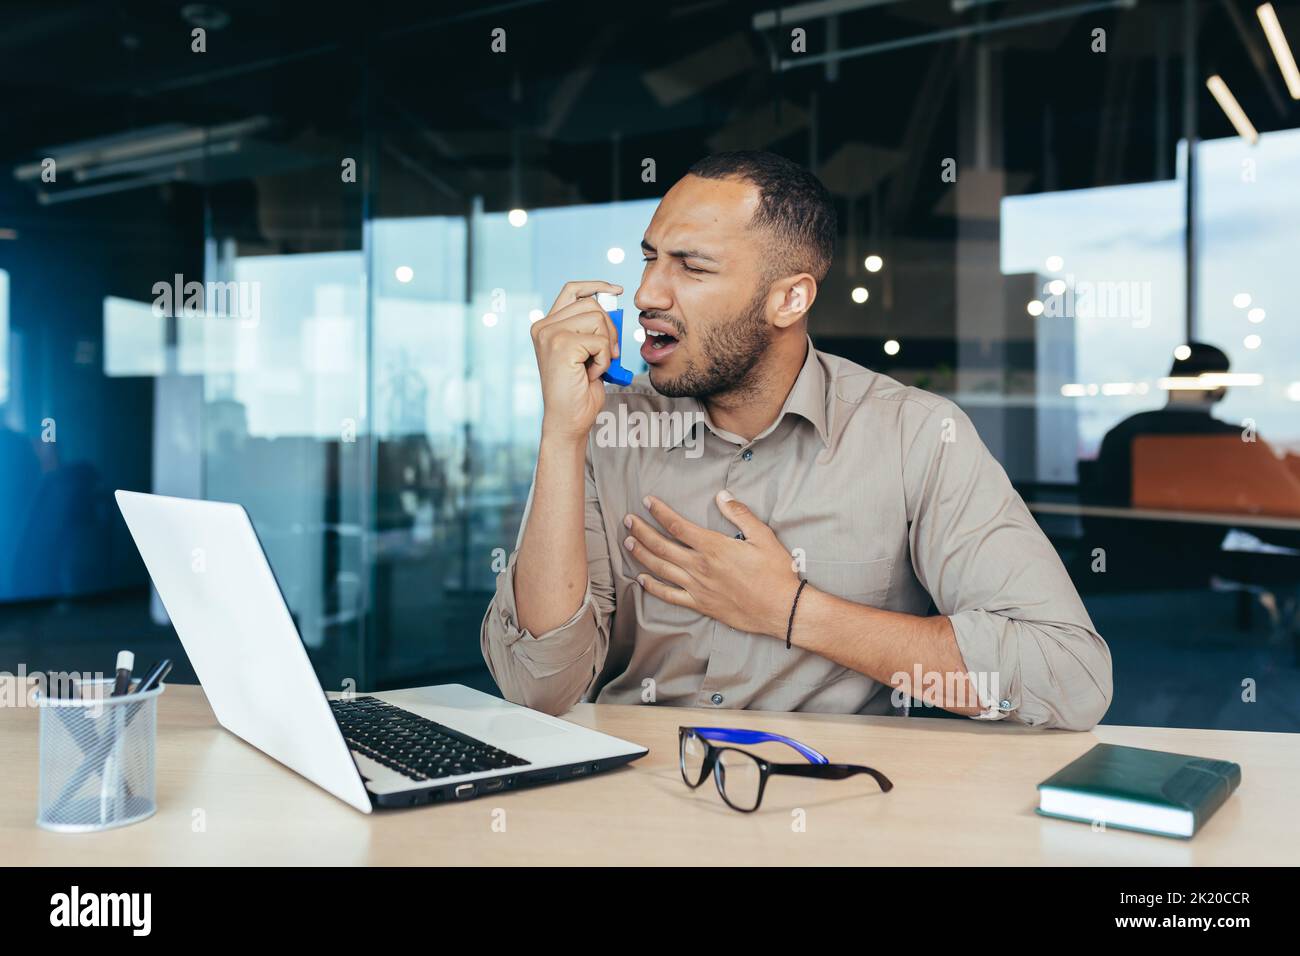 Sick office worker with asthma having trouble breathing, man using inhaler to relieve breathing, hispanic man working inside modern office building, mixed race man with laptop Stock Photo